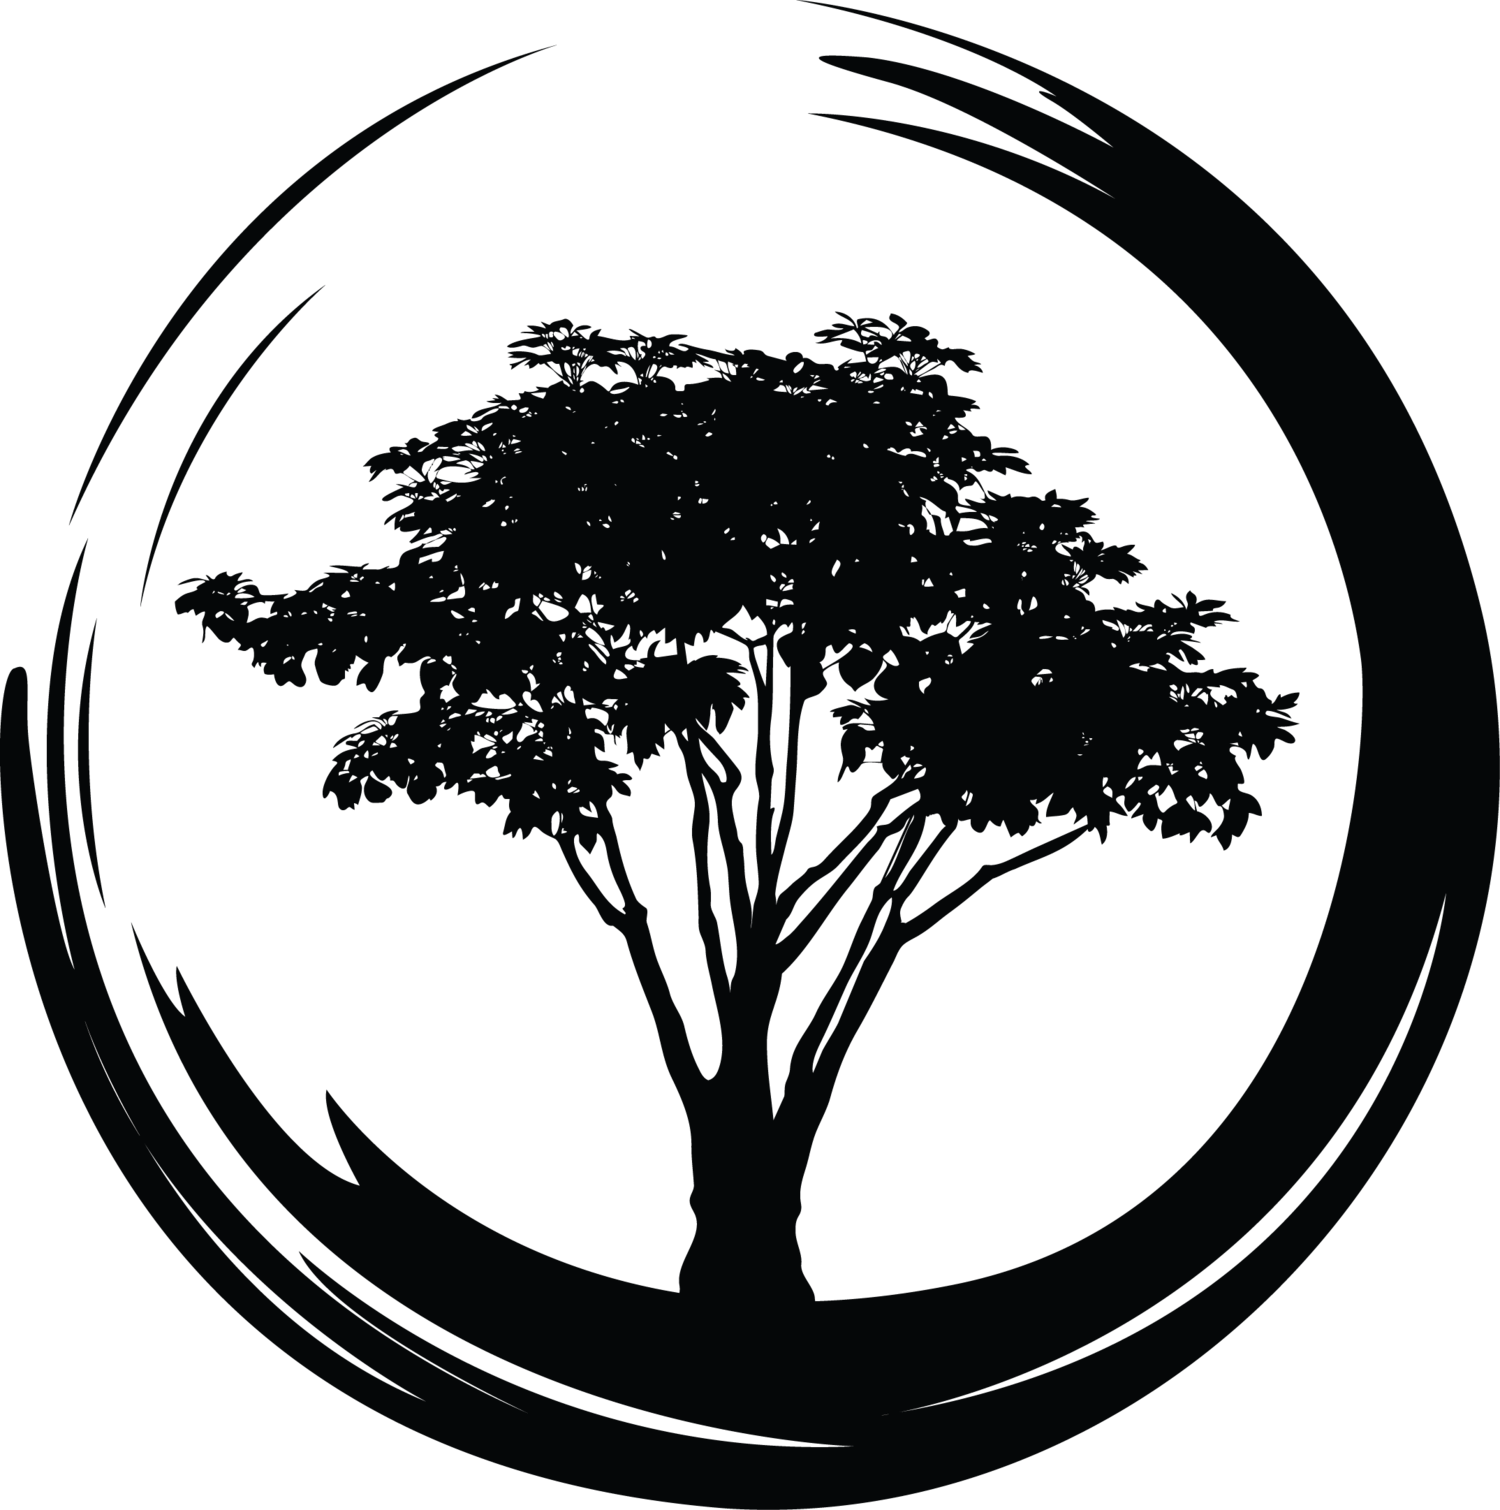 Black Tree in Circle Logo - About